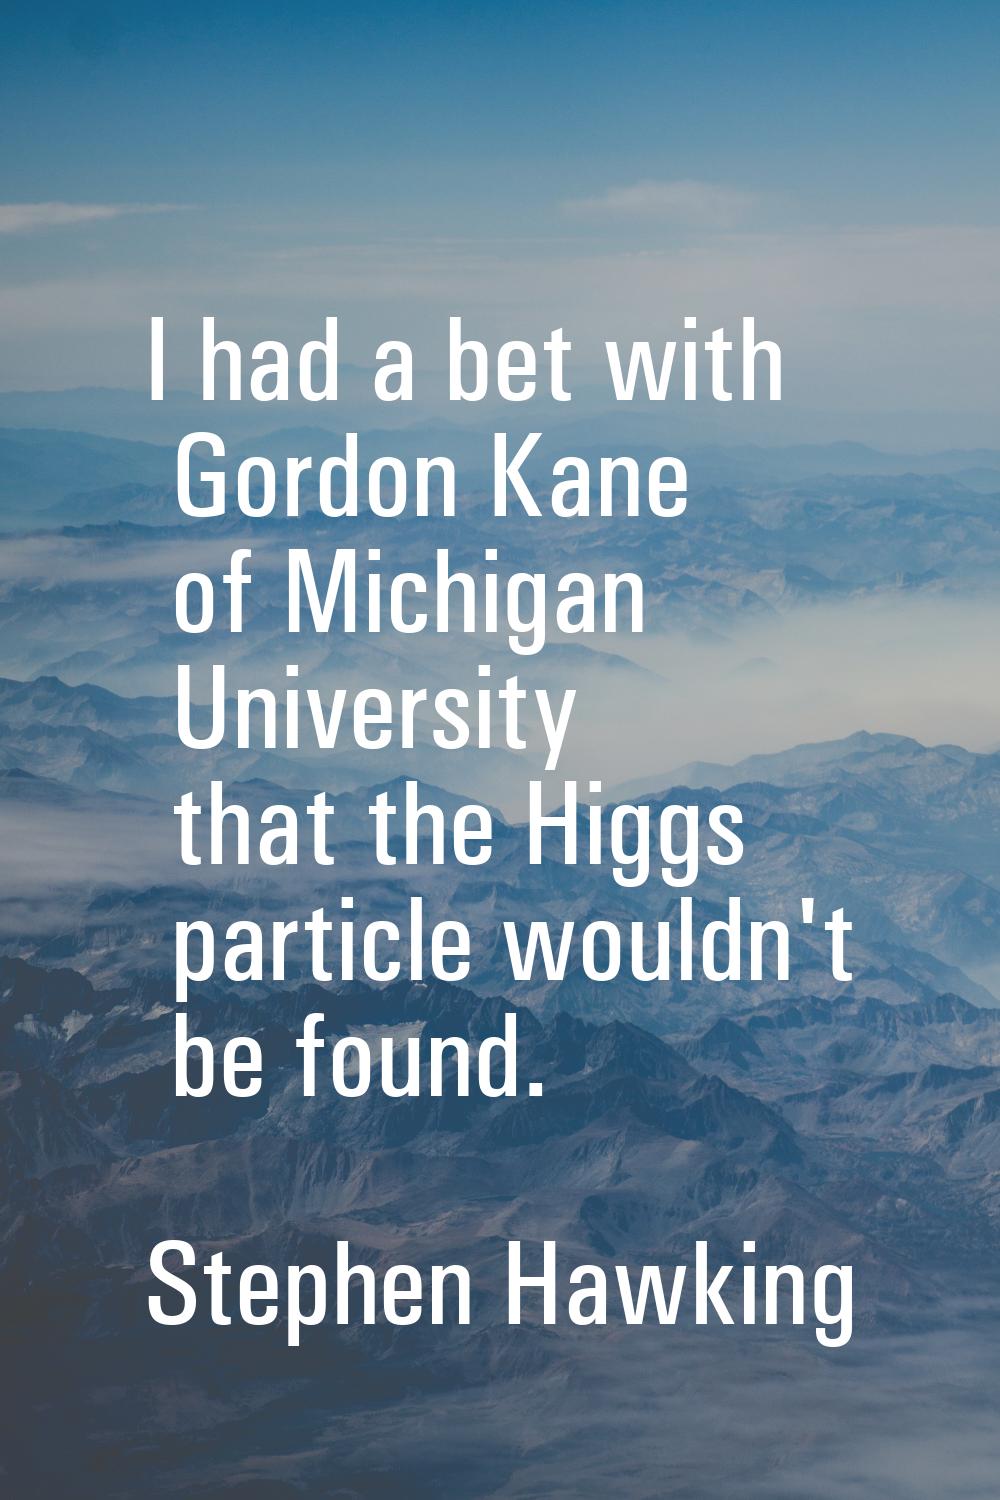 I had a bet with Gordon Kane of Michigan University that the Higgs particle wouldn't be found.